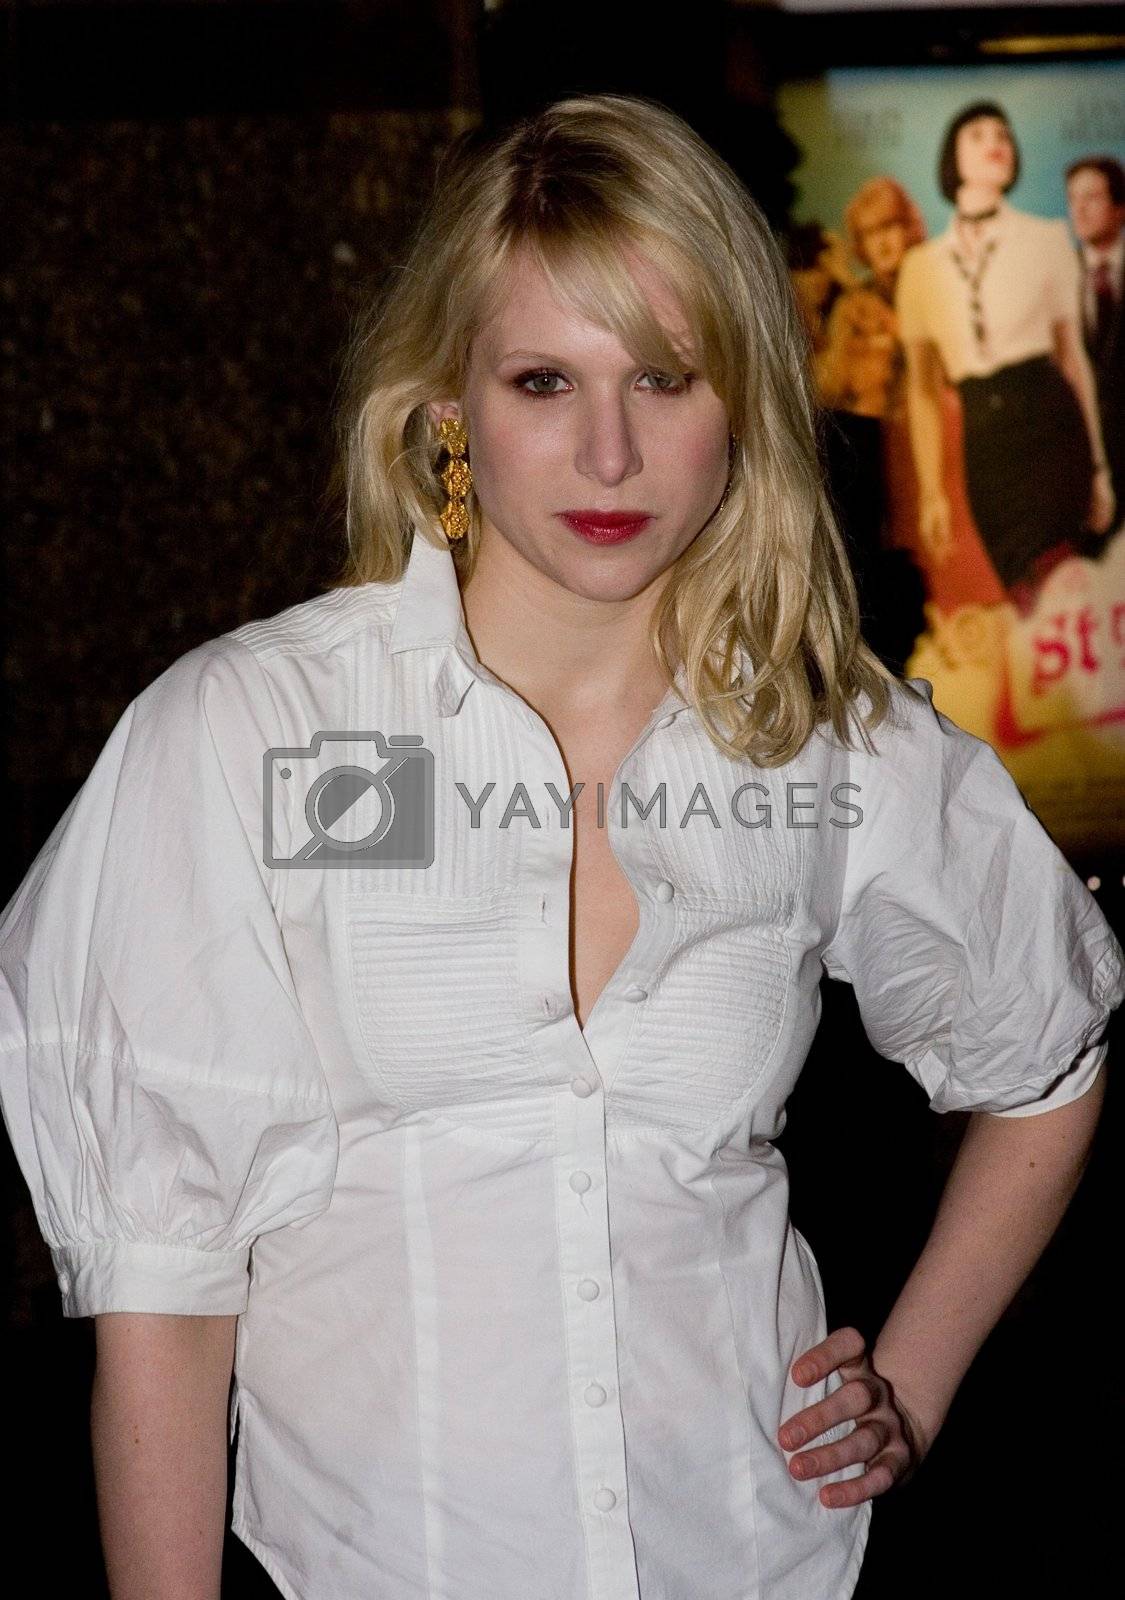 Lucy punch images